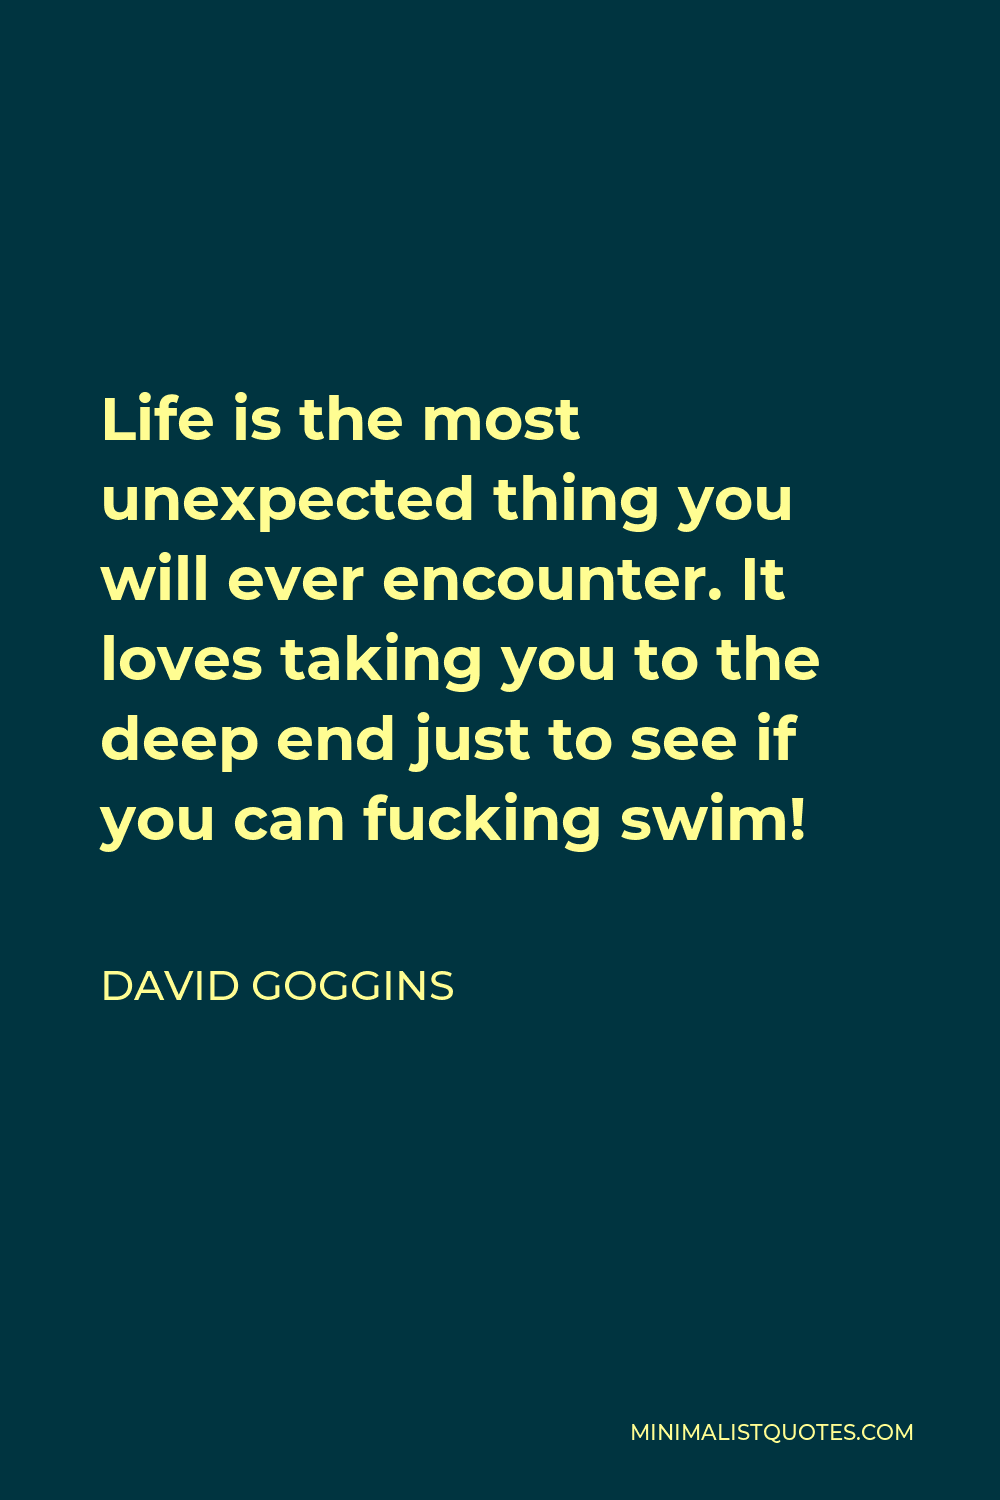 David Goggins Quote - Life is the most unexpected thing you will ever encounter. It loves taking you to the deep end just to see if you can fucking swim!